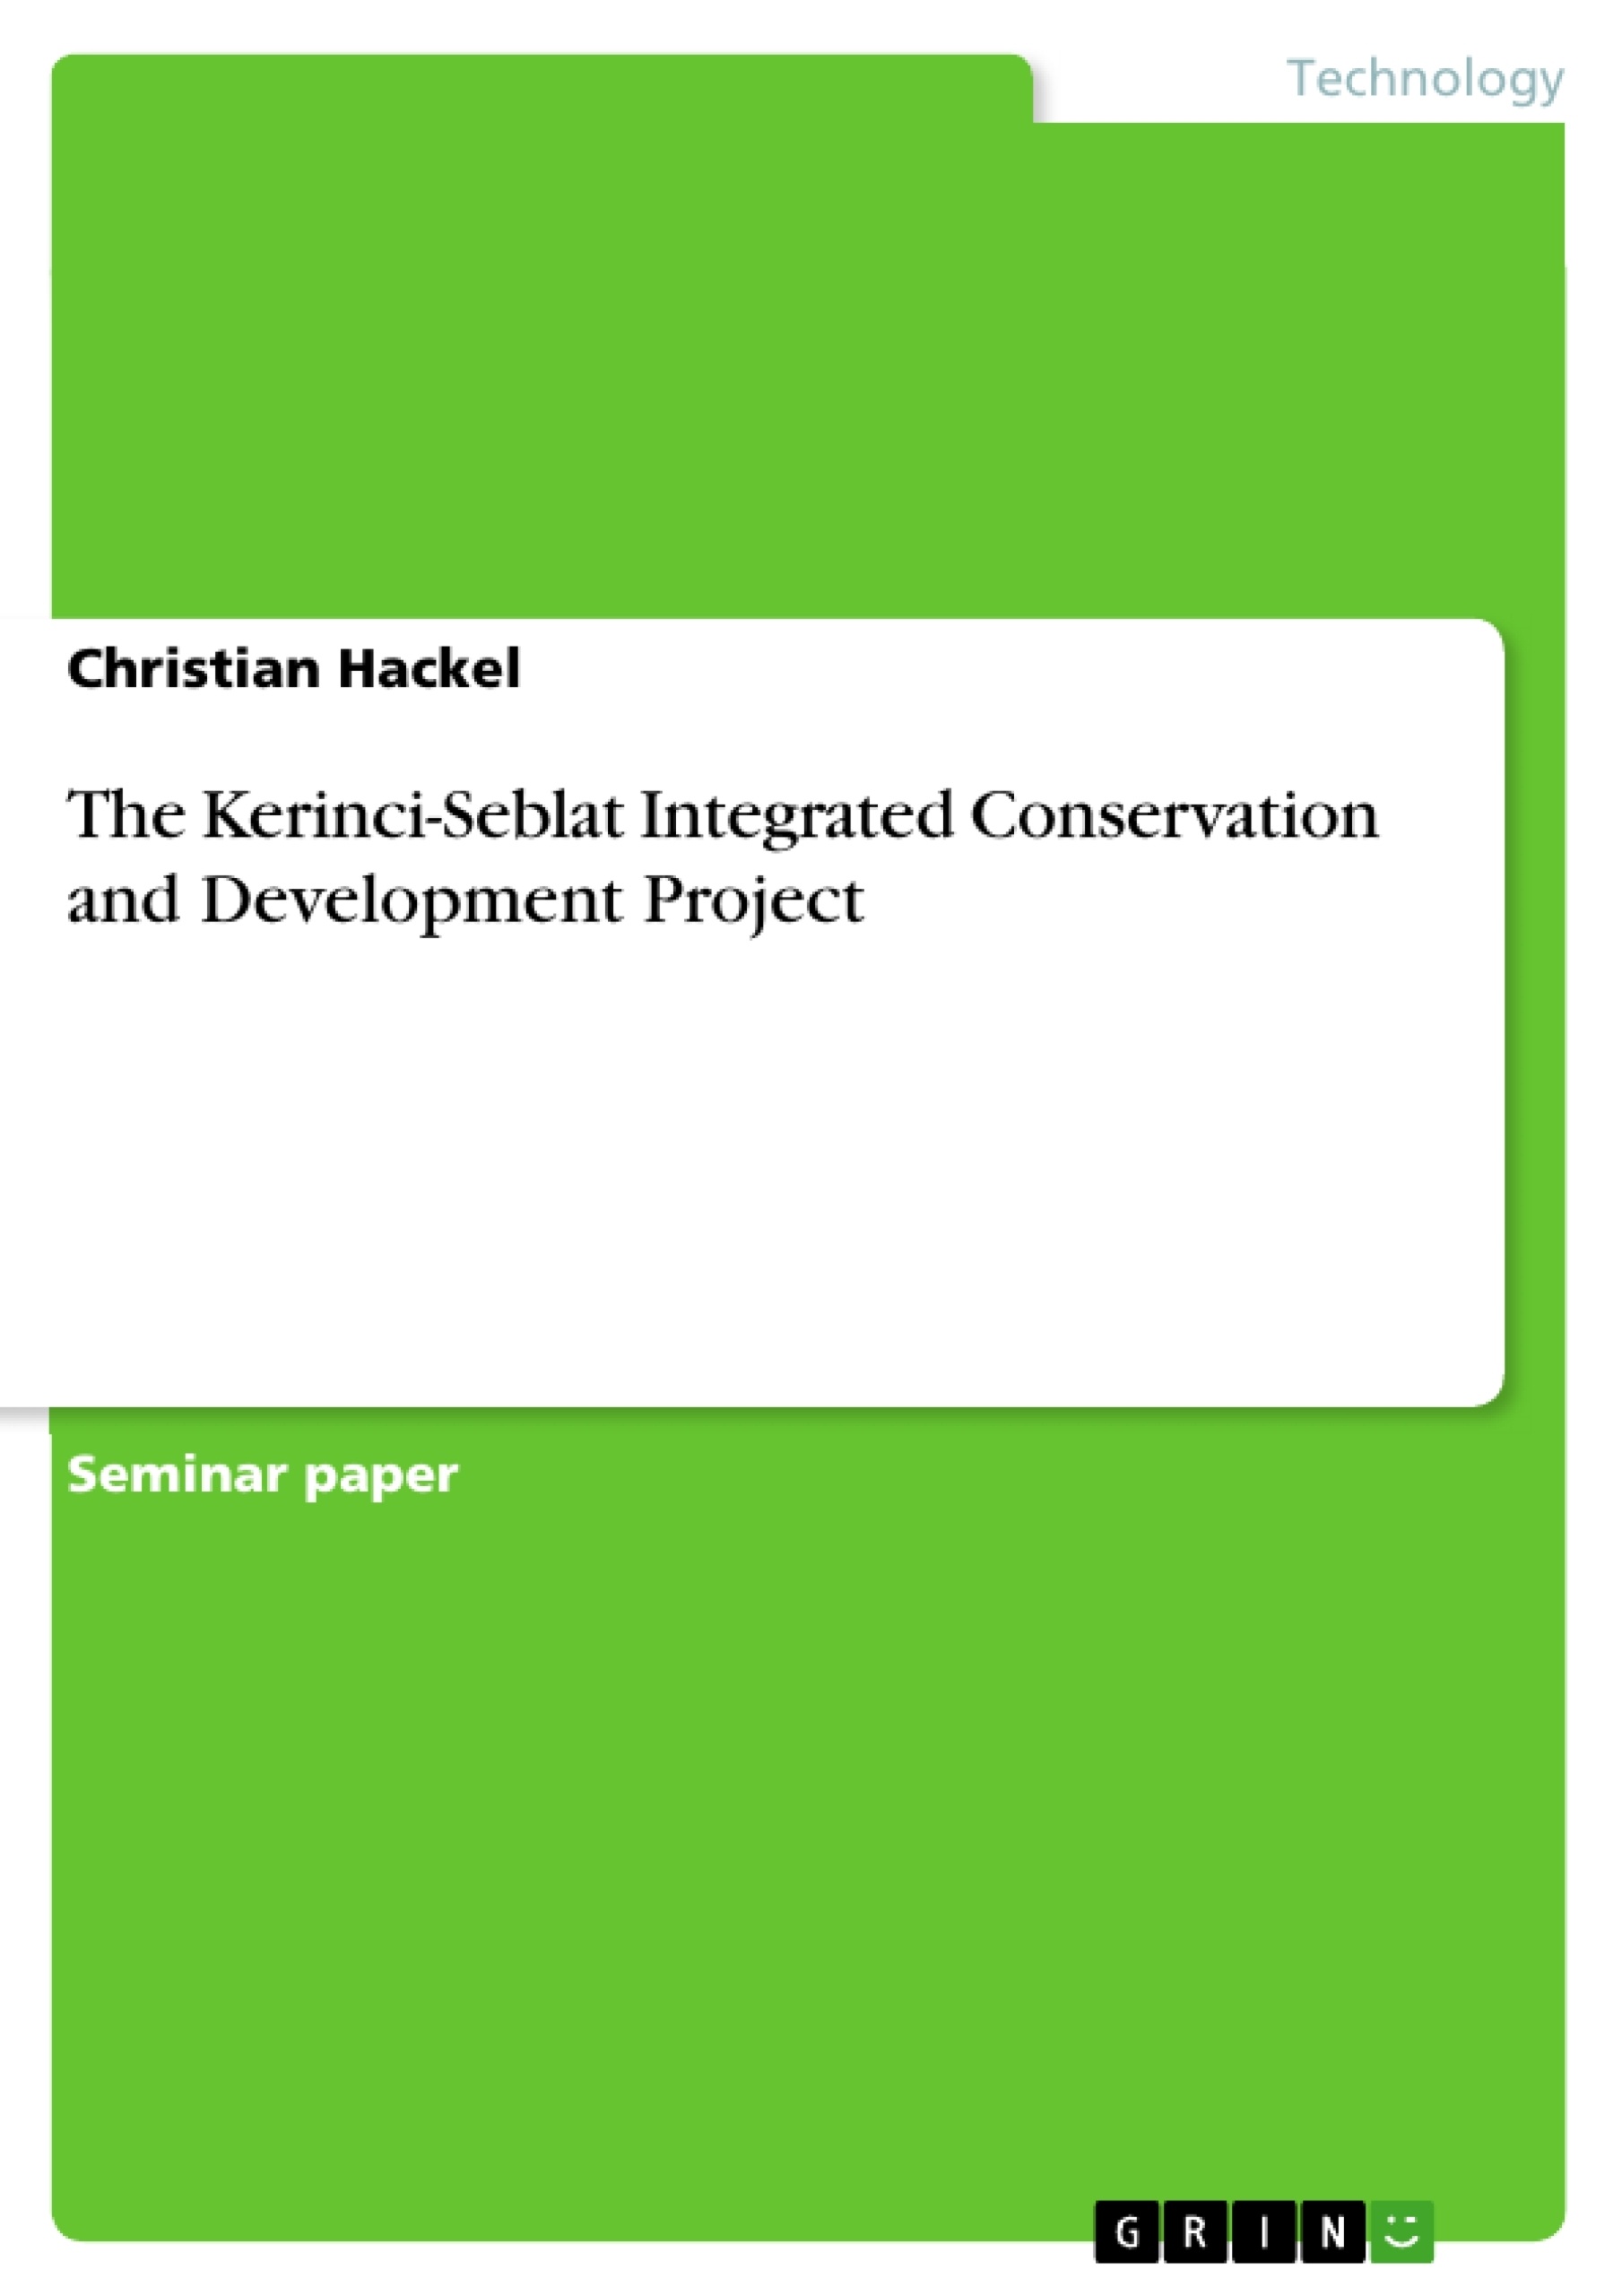 Title: The Kerinci-Seblat Integrated Conservation and Development Project